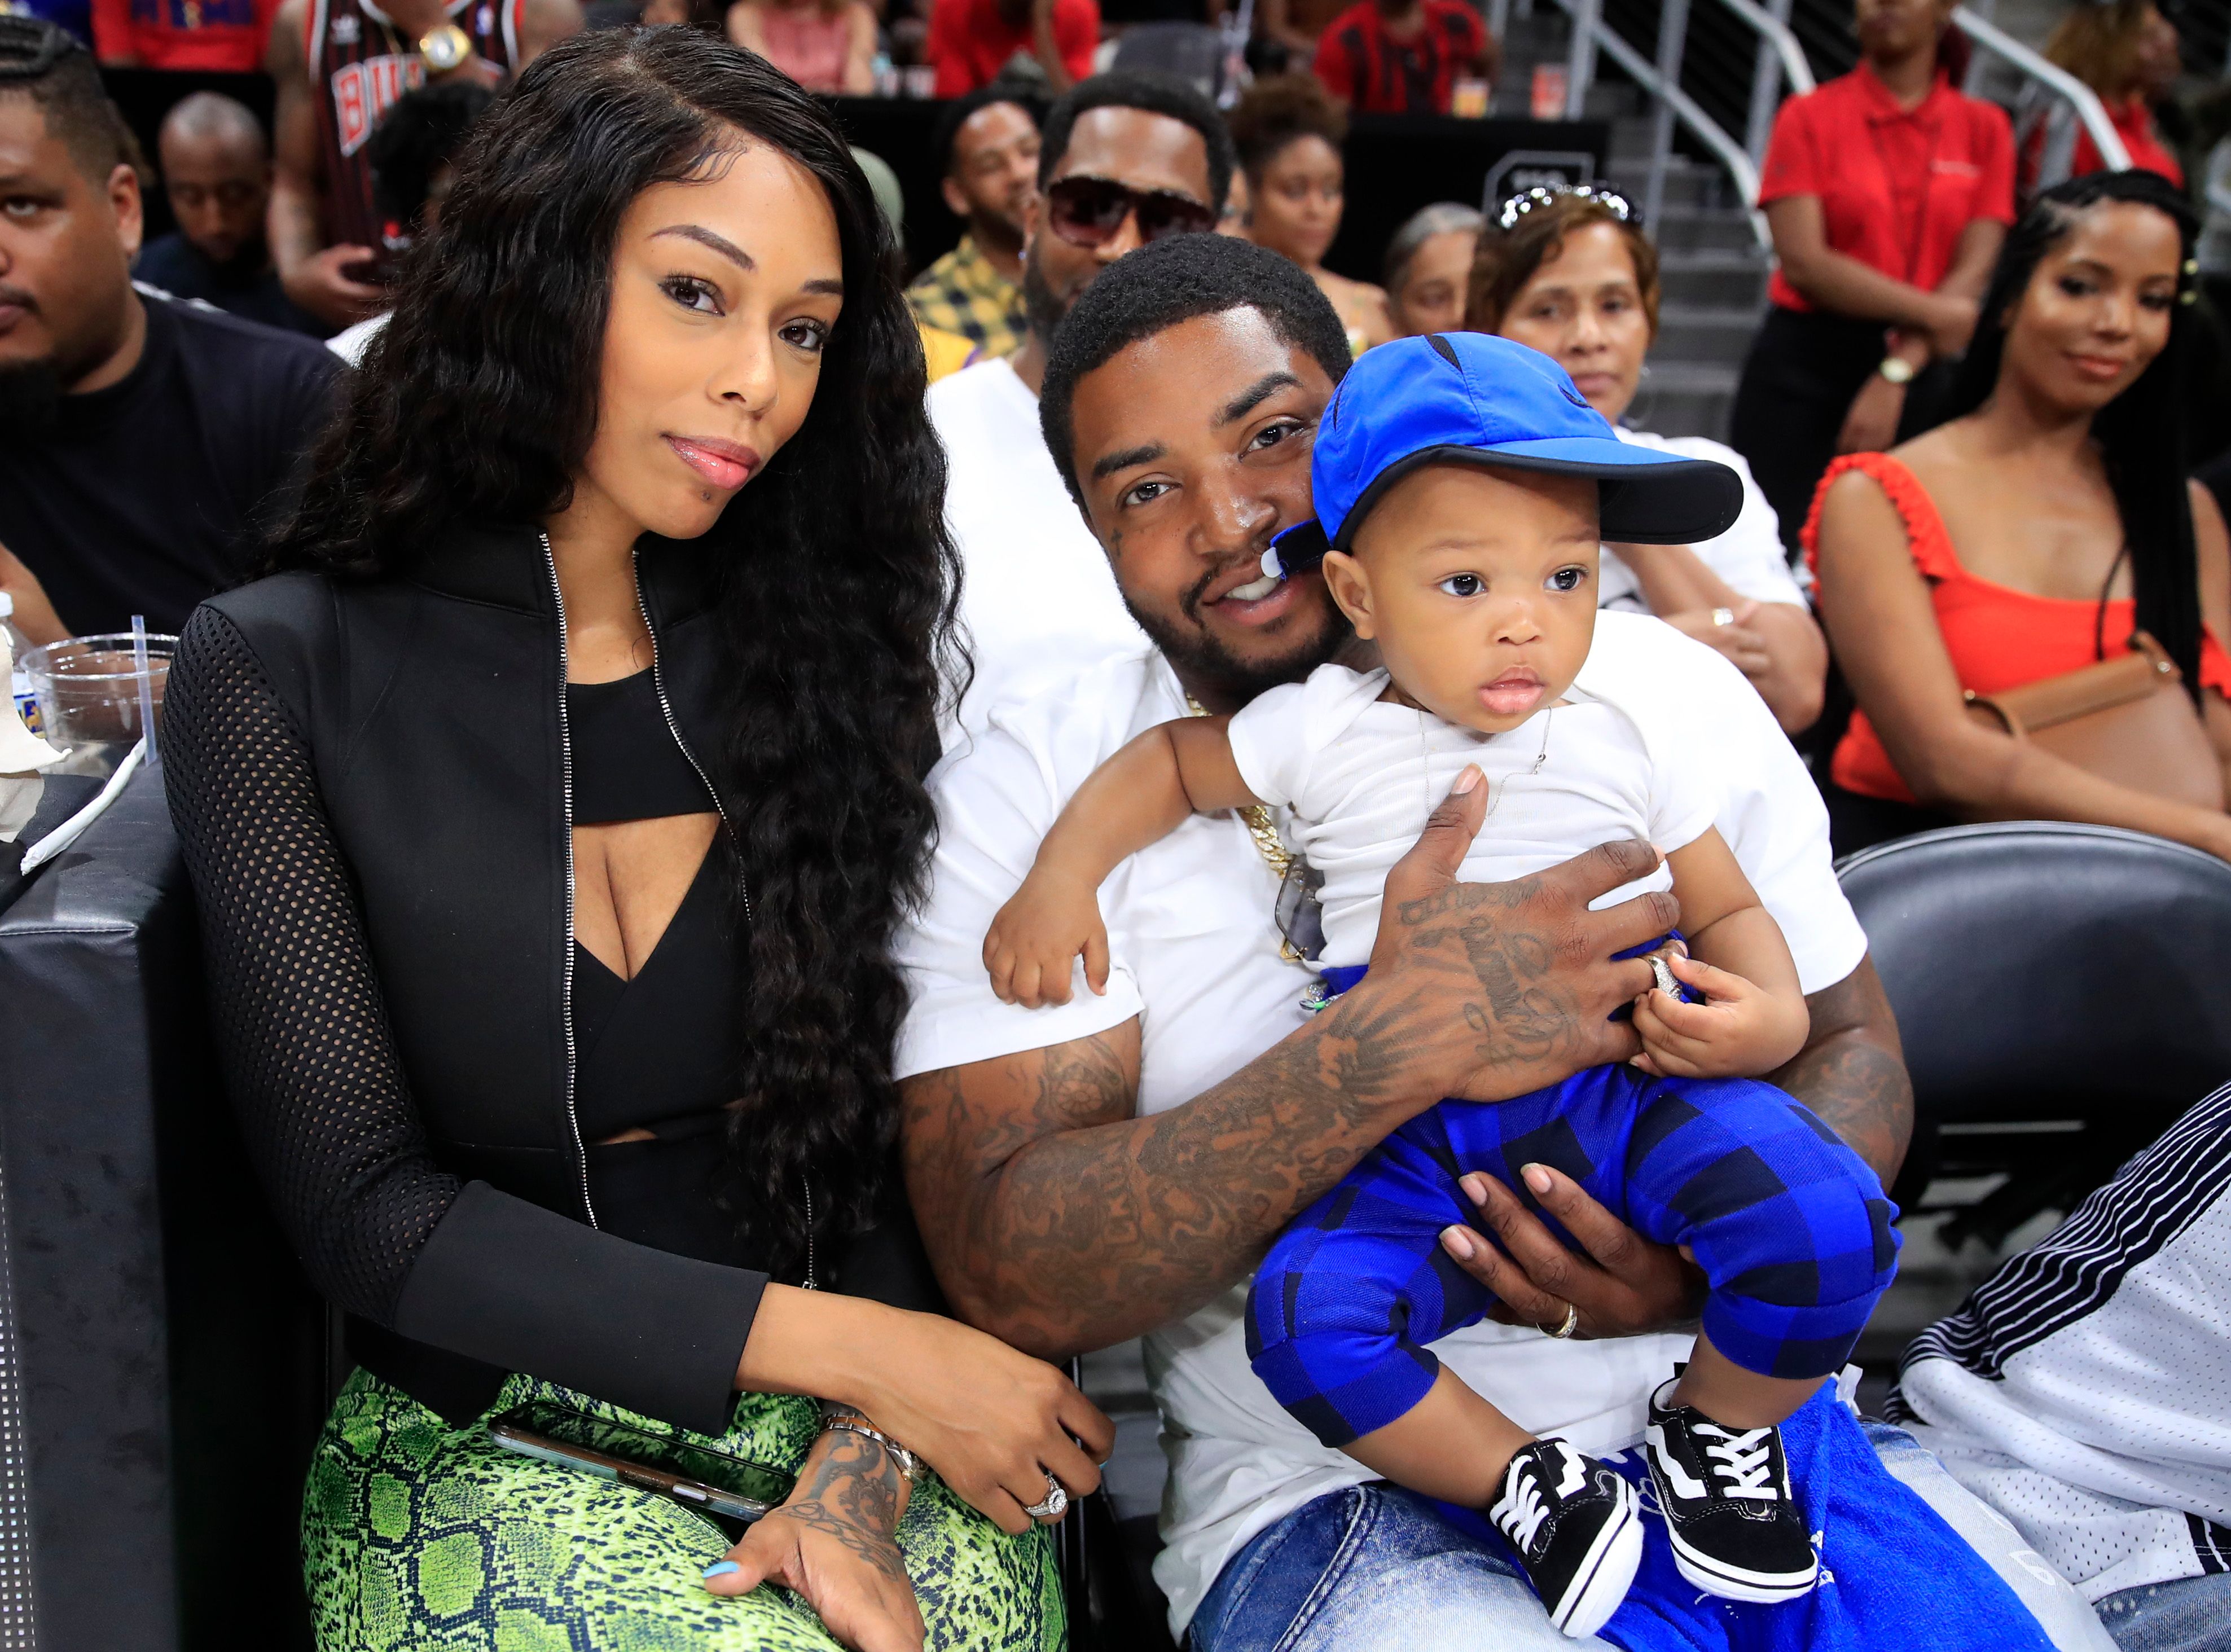 Bambi Benson, Lil Scrappy and their son Breland at a basketball game on July 07, 2019 in Atlanta.| Photo: Getty Images